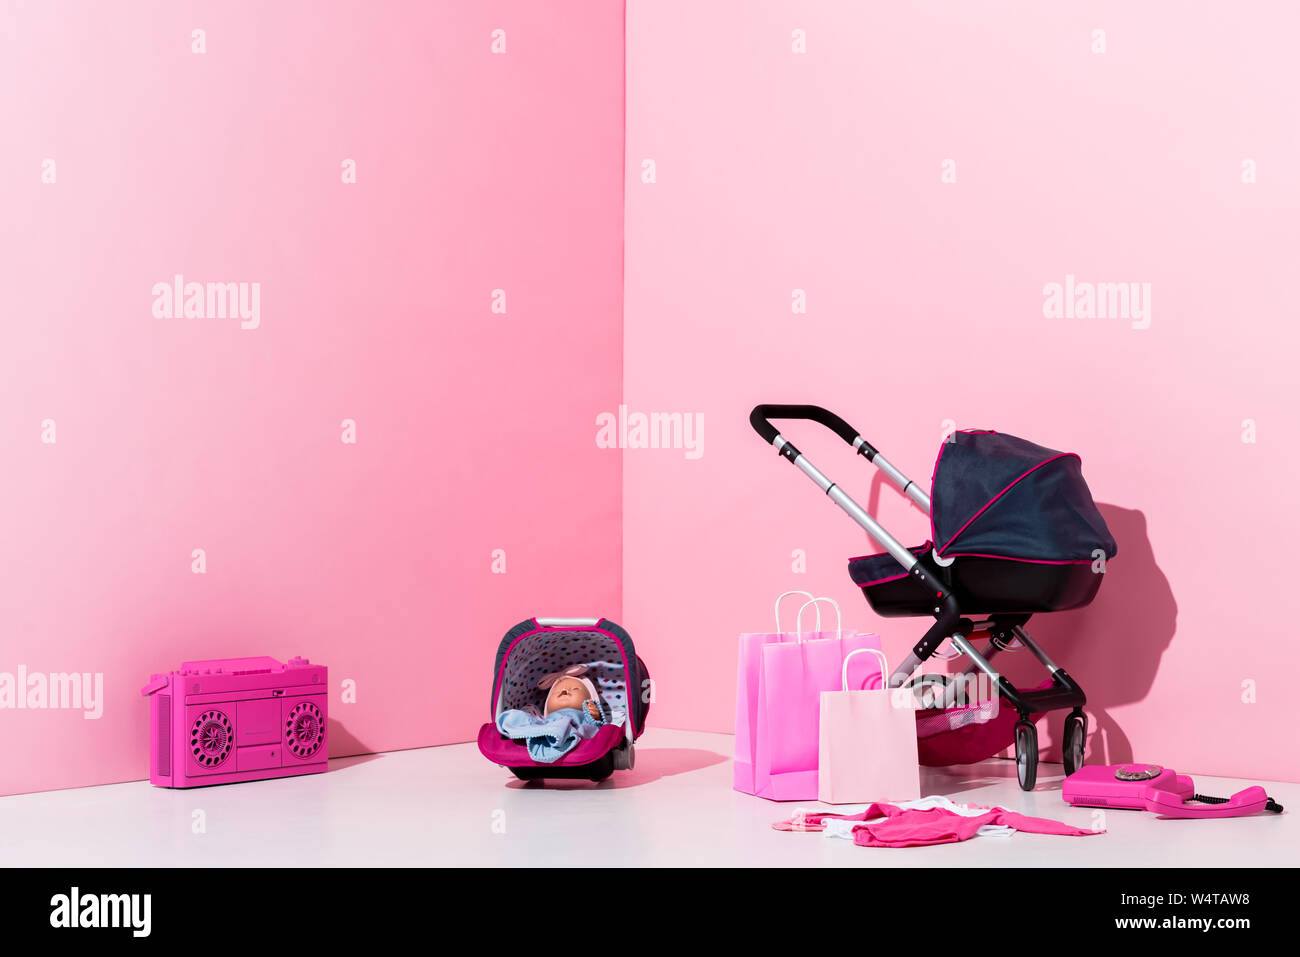 baby carriage, doll in baby carrier, shopping bags and boombox on pink Stock Photo